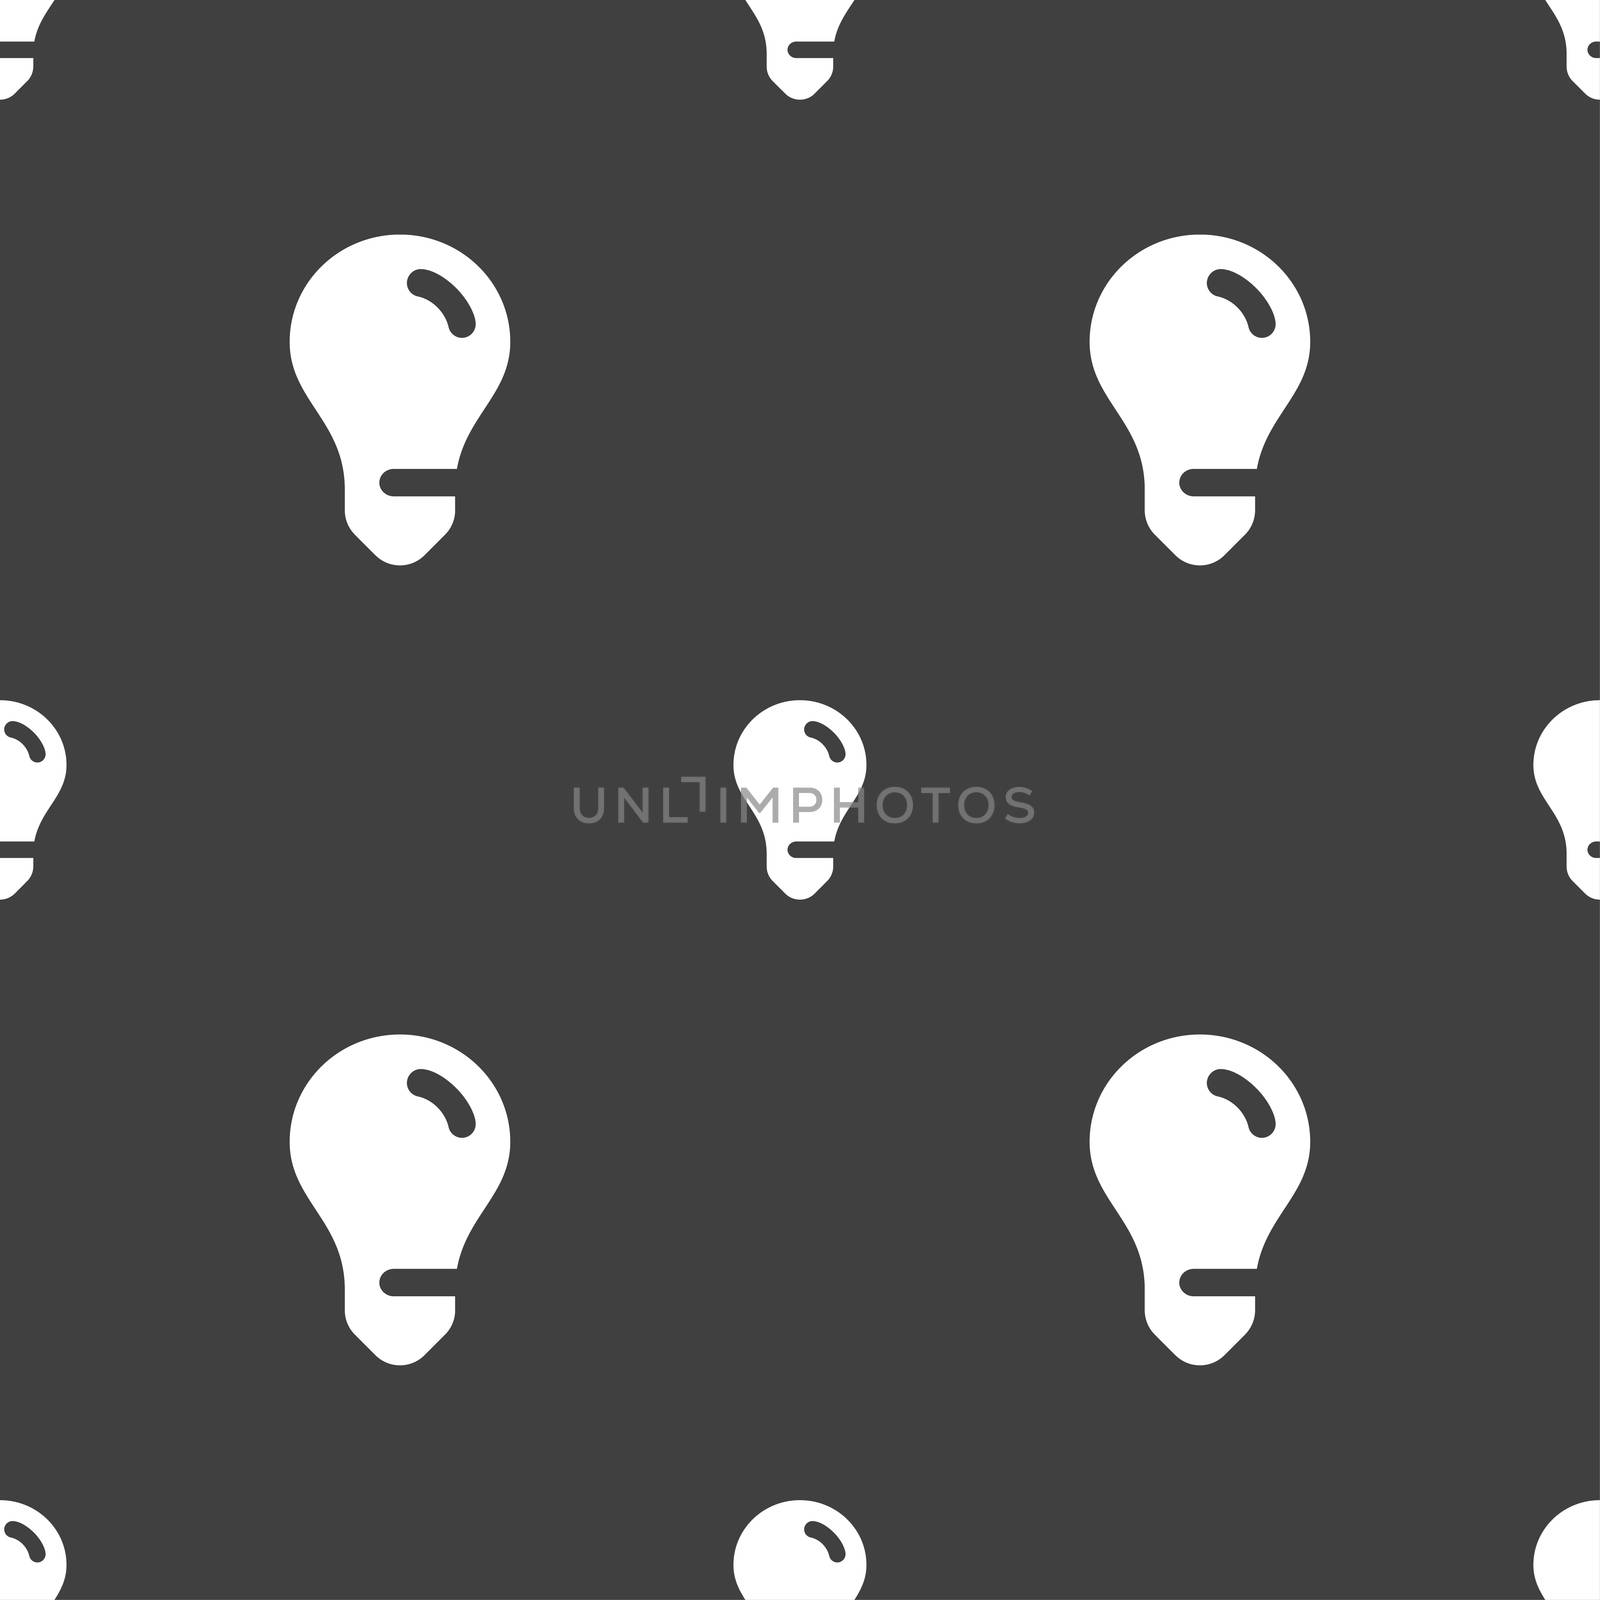 light bulb, idea icon sign. Seamless pattern on a gray background. illustration